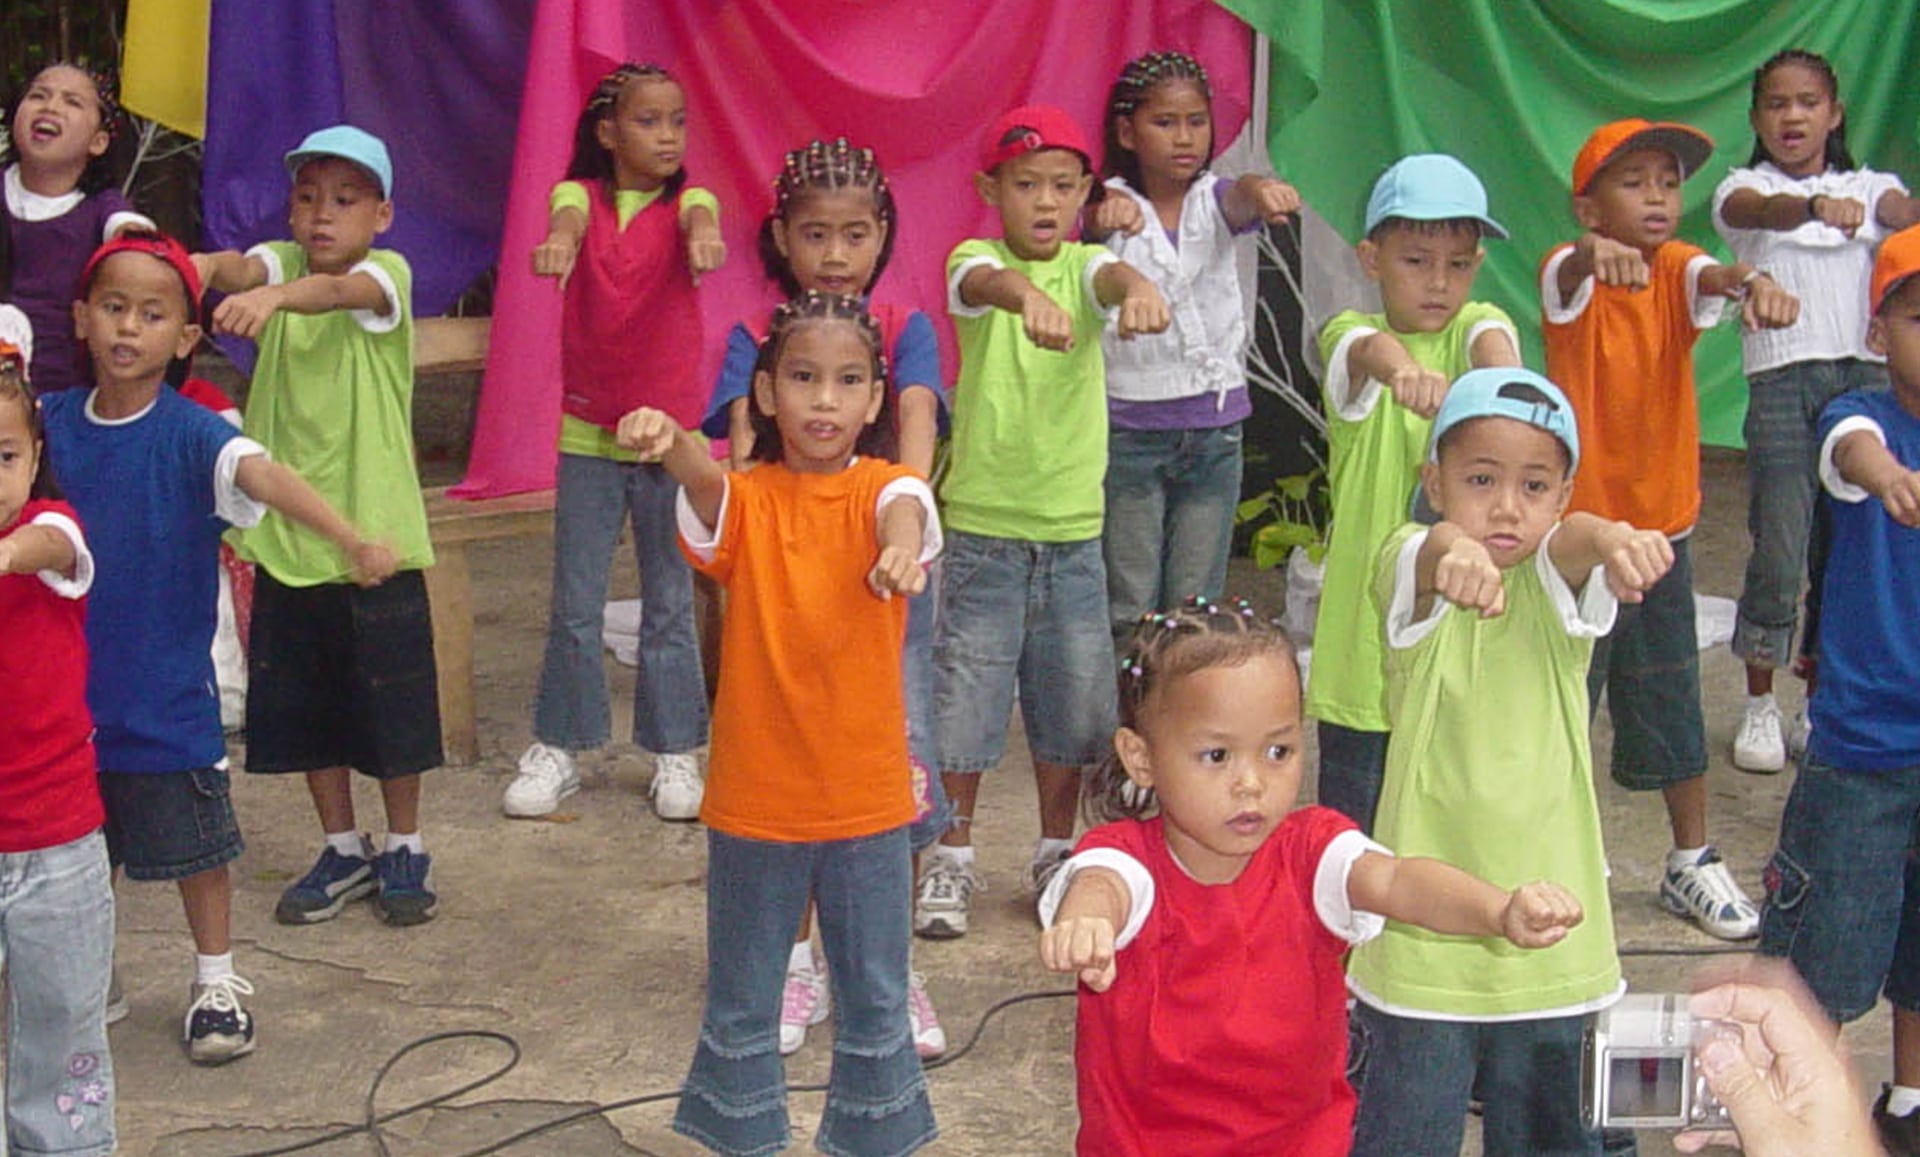 My Fathers House Children Exercising - Benny Hinn Ministries